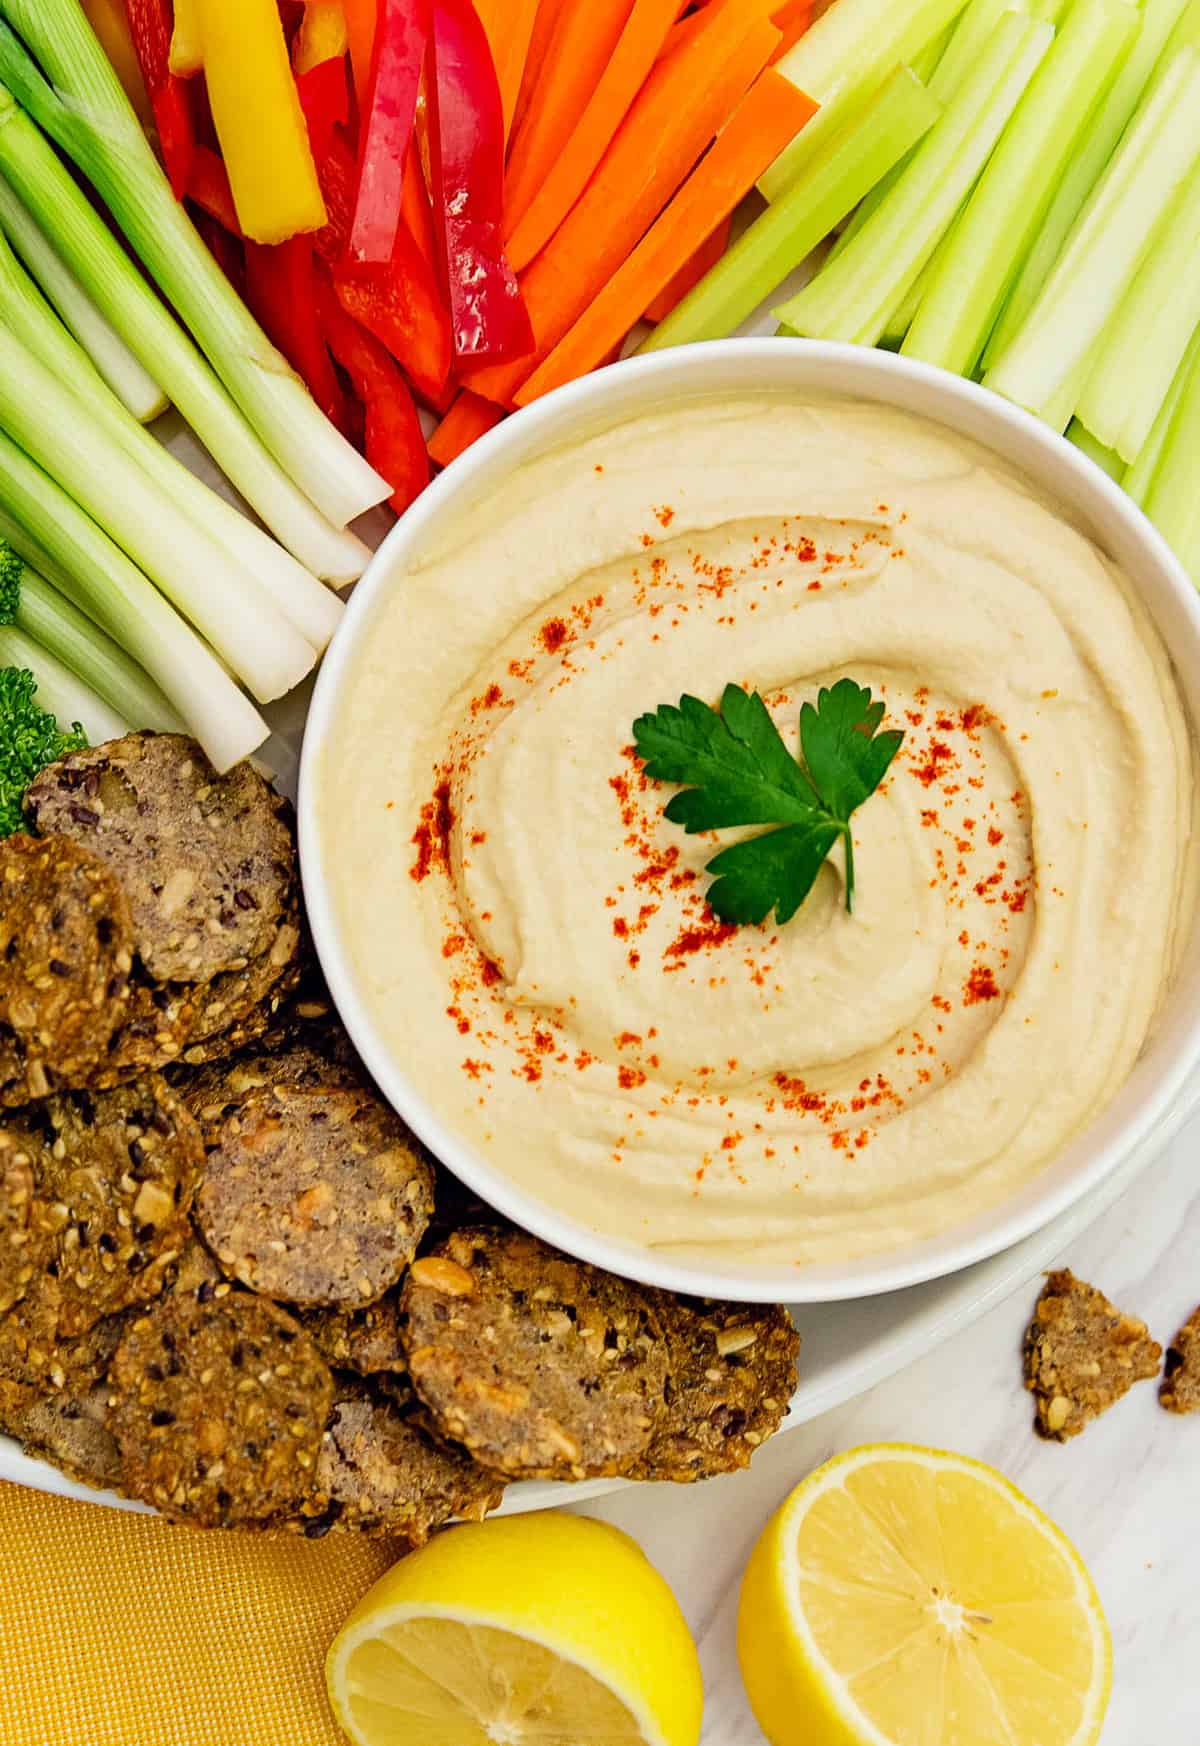 the best hummus, hummus, recipe, vegan, vegetarian, whole food plant based, wfpb, gluten free, oil free, refined sugar free, no oil, no refined sugar, no dairy, dinner, lunch, side, appetizer, dinner party, entertaining, simple, healthy